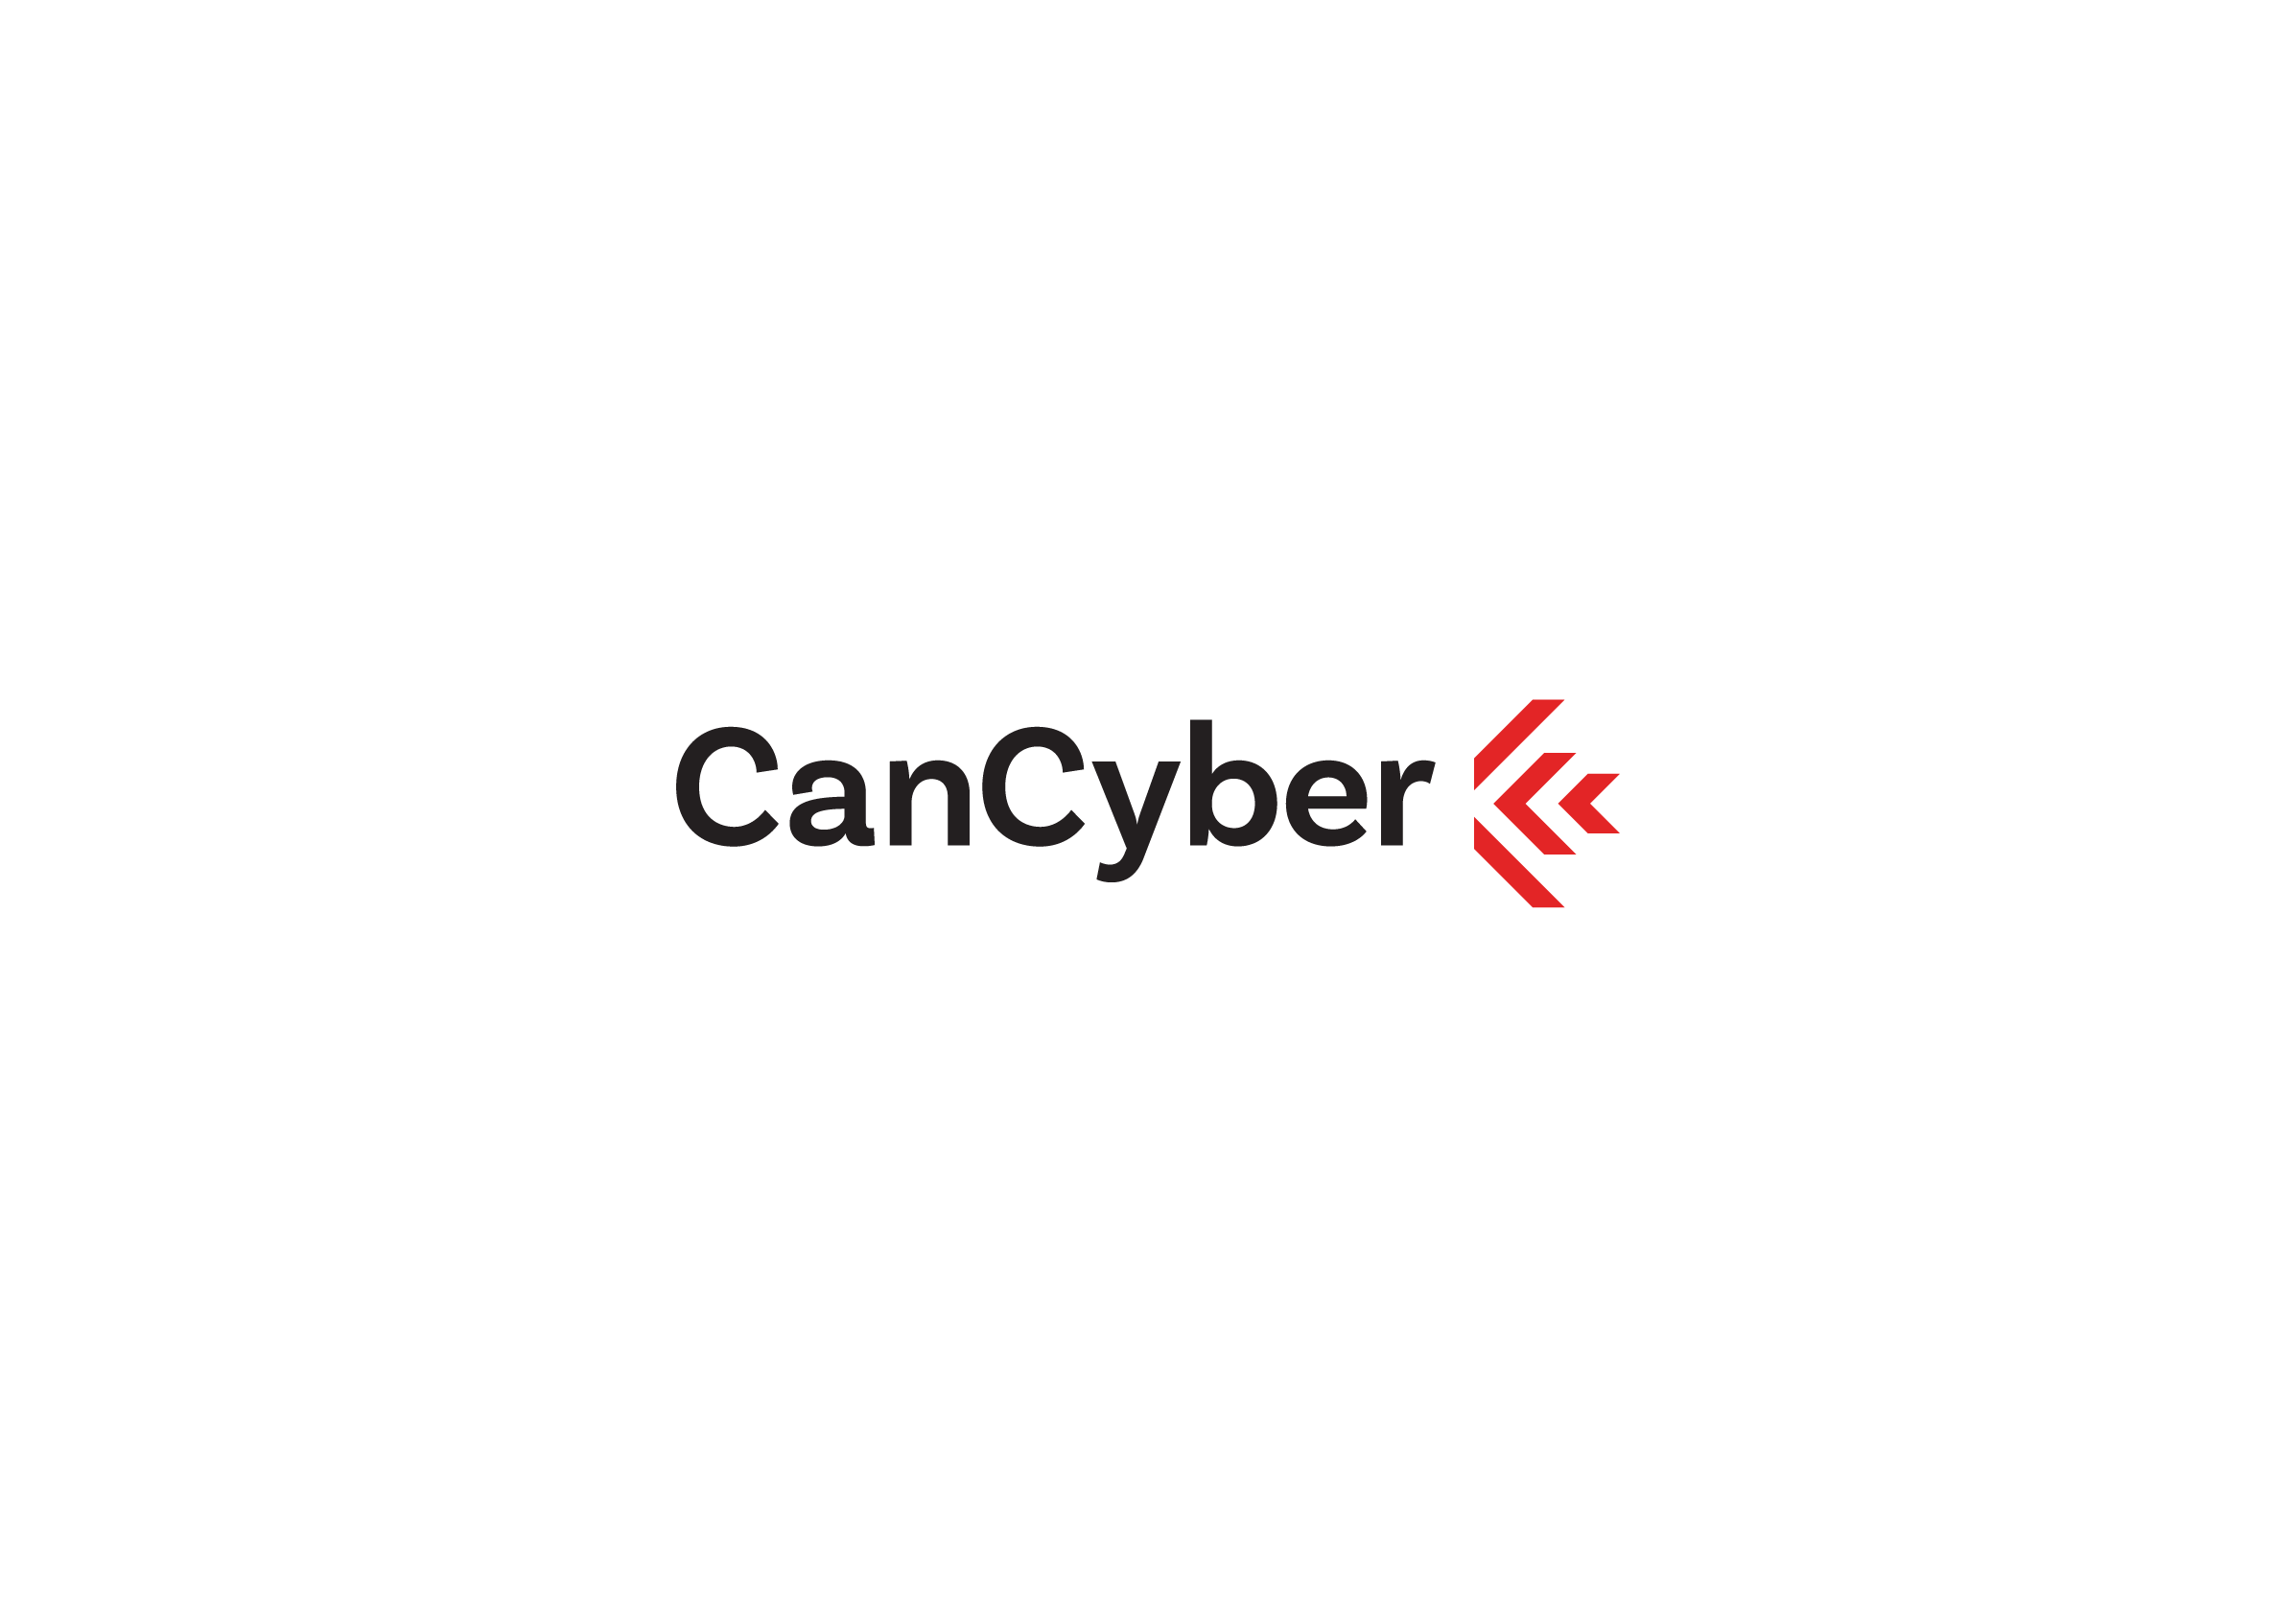 Logo for CanCyber, a cyber threat intelligence company by Graphic Design Studio idApostle